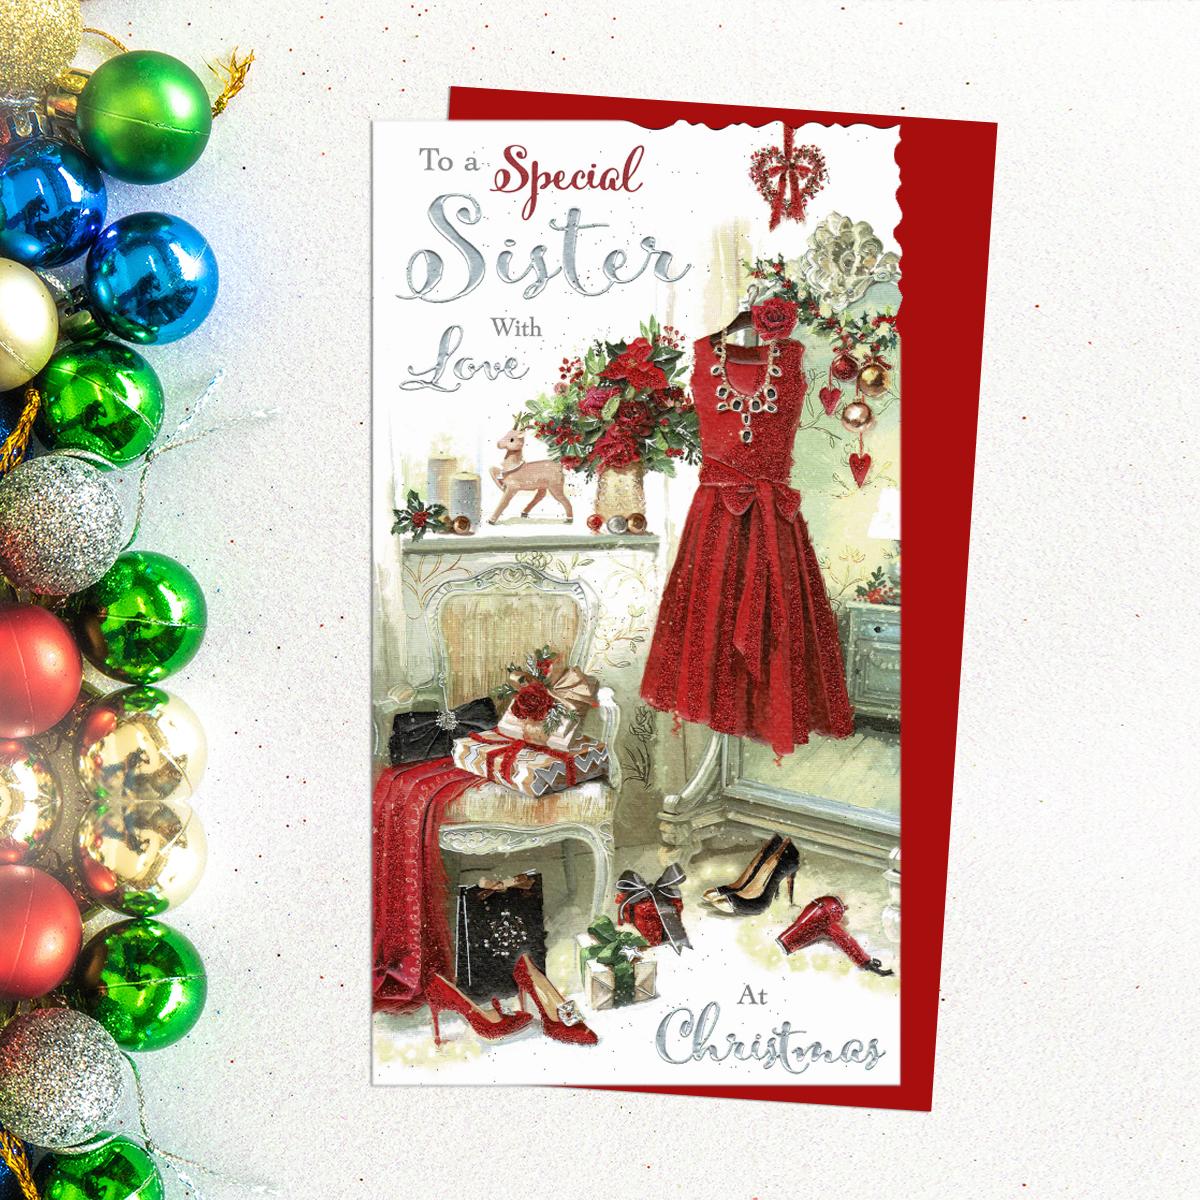 To A Special sister With Love At Christmas Featuring Beautiful Red Dresses And Shoes And Hairdryer. Red And Silver Lettering And Red Envelope Complete The Look!